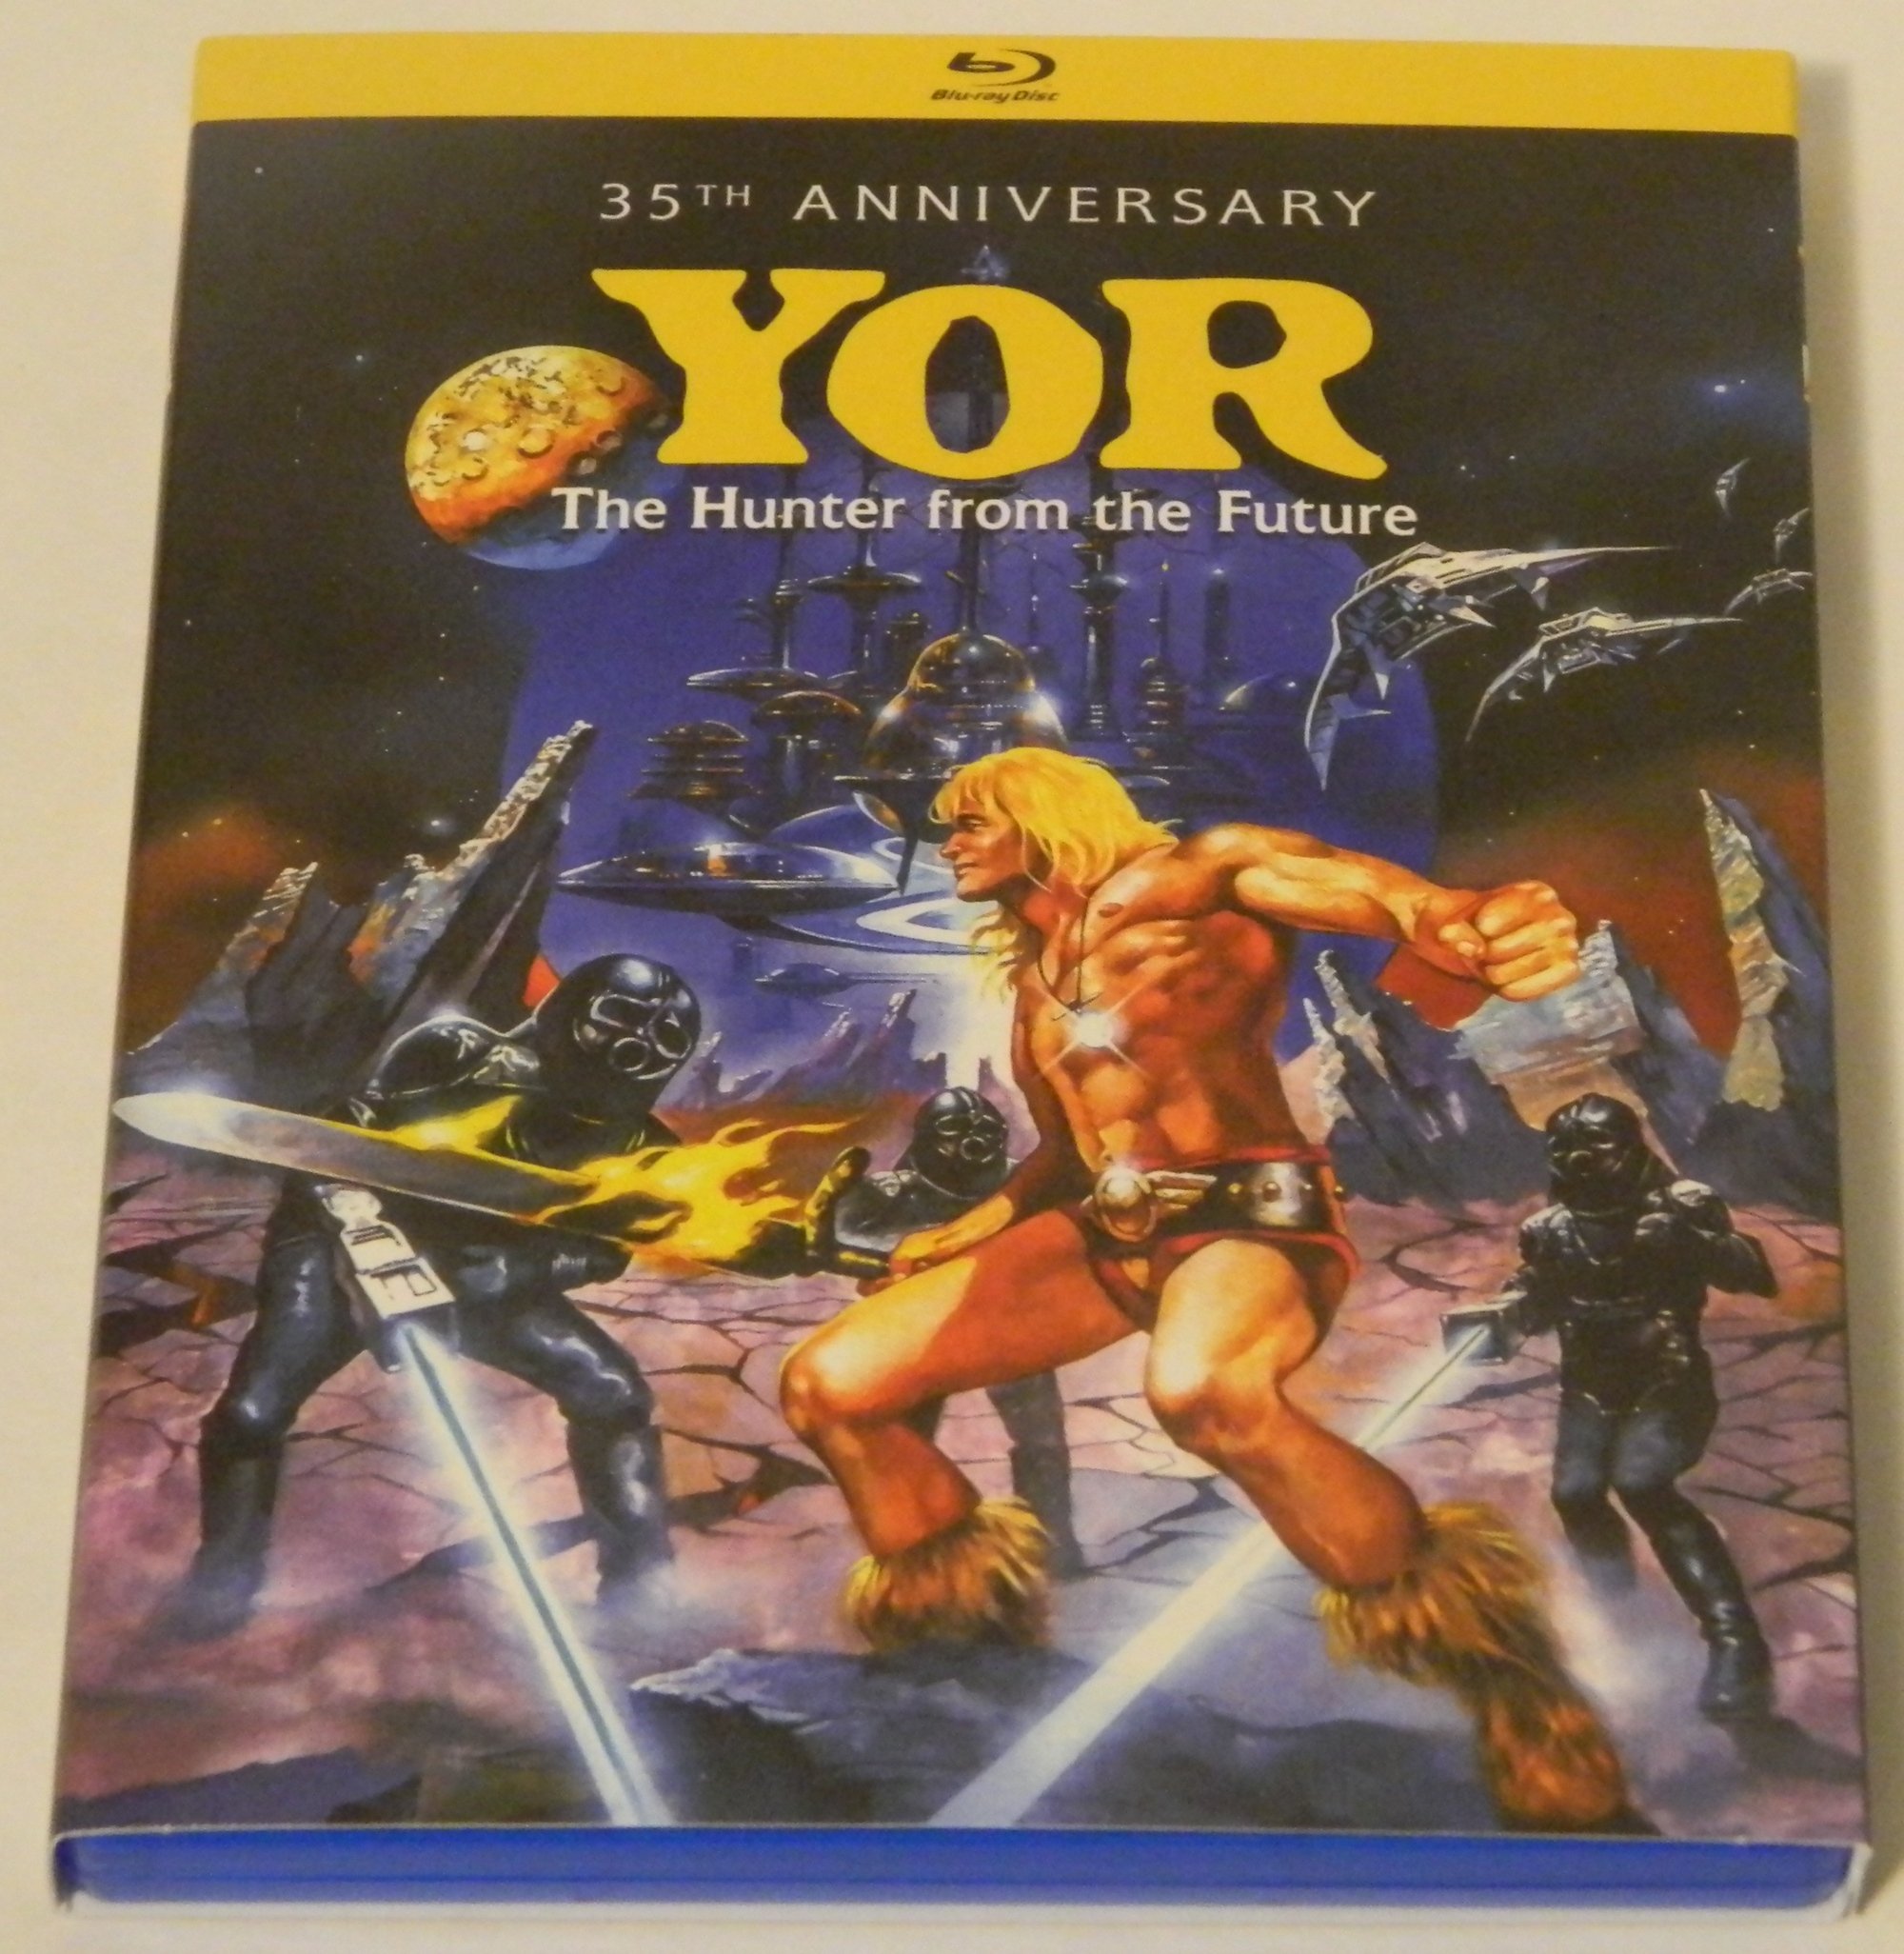 Yor, the Hunter From the Future: 35th Anniversary Edition Blu-ray Review